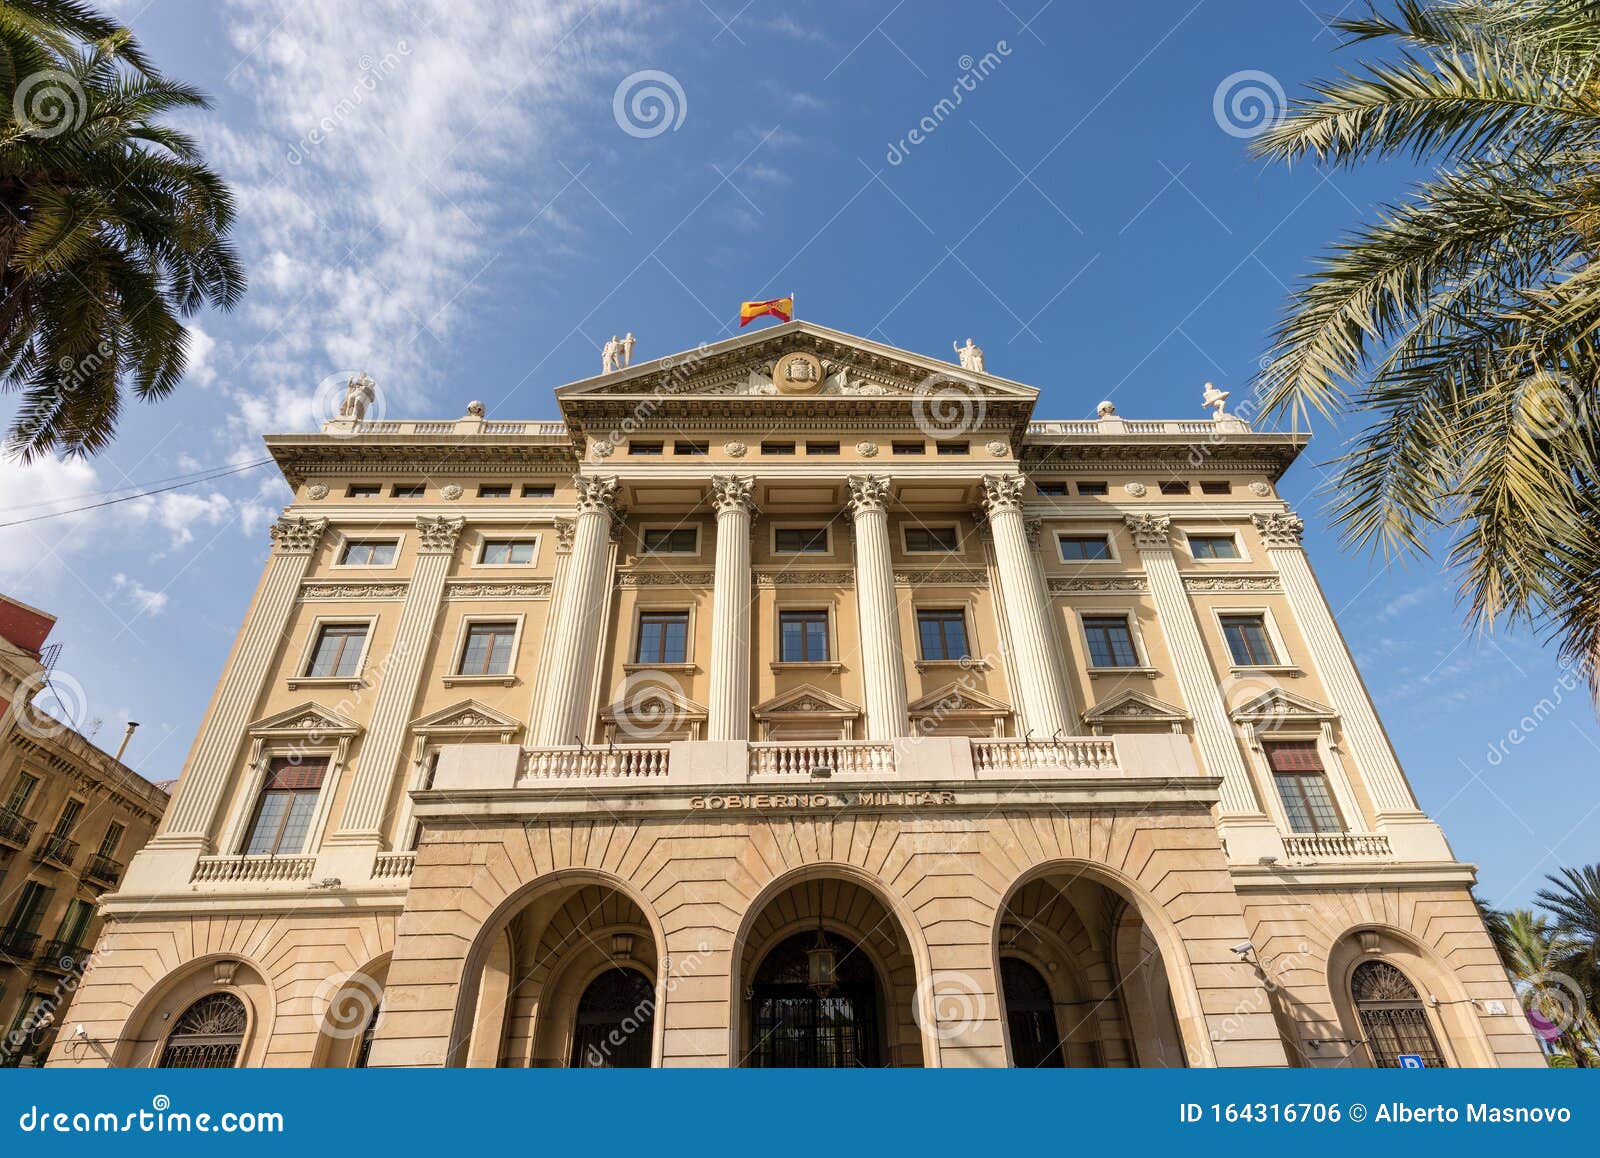 gobierno militar - military government in barcelona spain